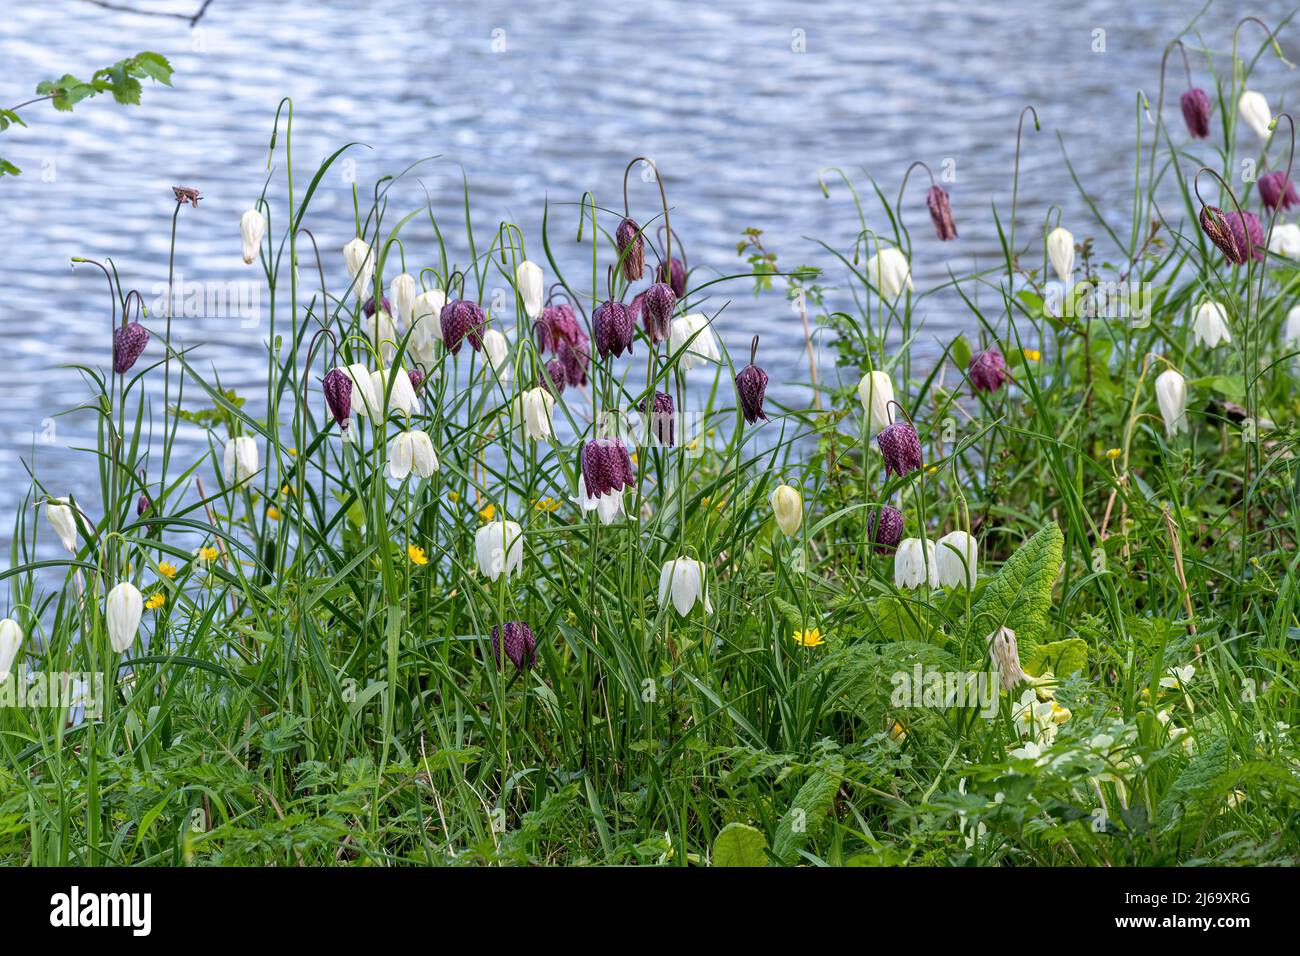 Snakeshead fritillaries (Fritillaria meleagris) beside the river at Waterperry Gardens in Oxfordshire, England, UK Stock Photo